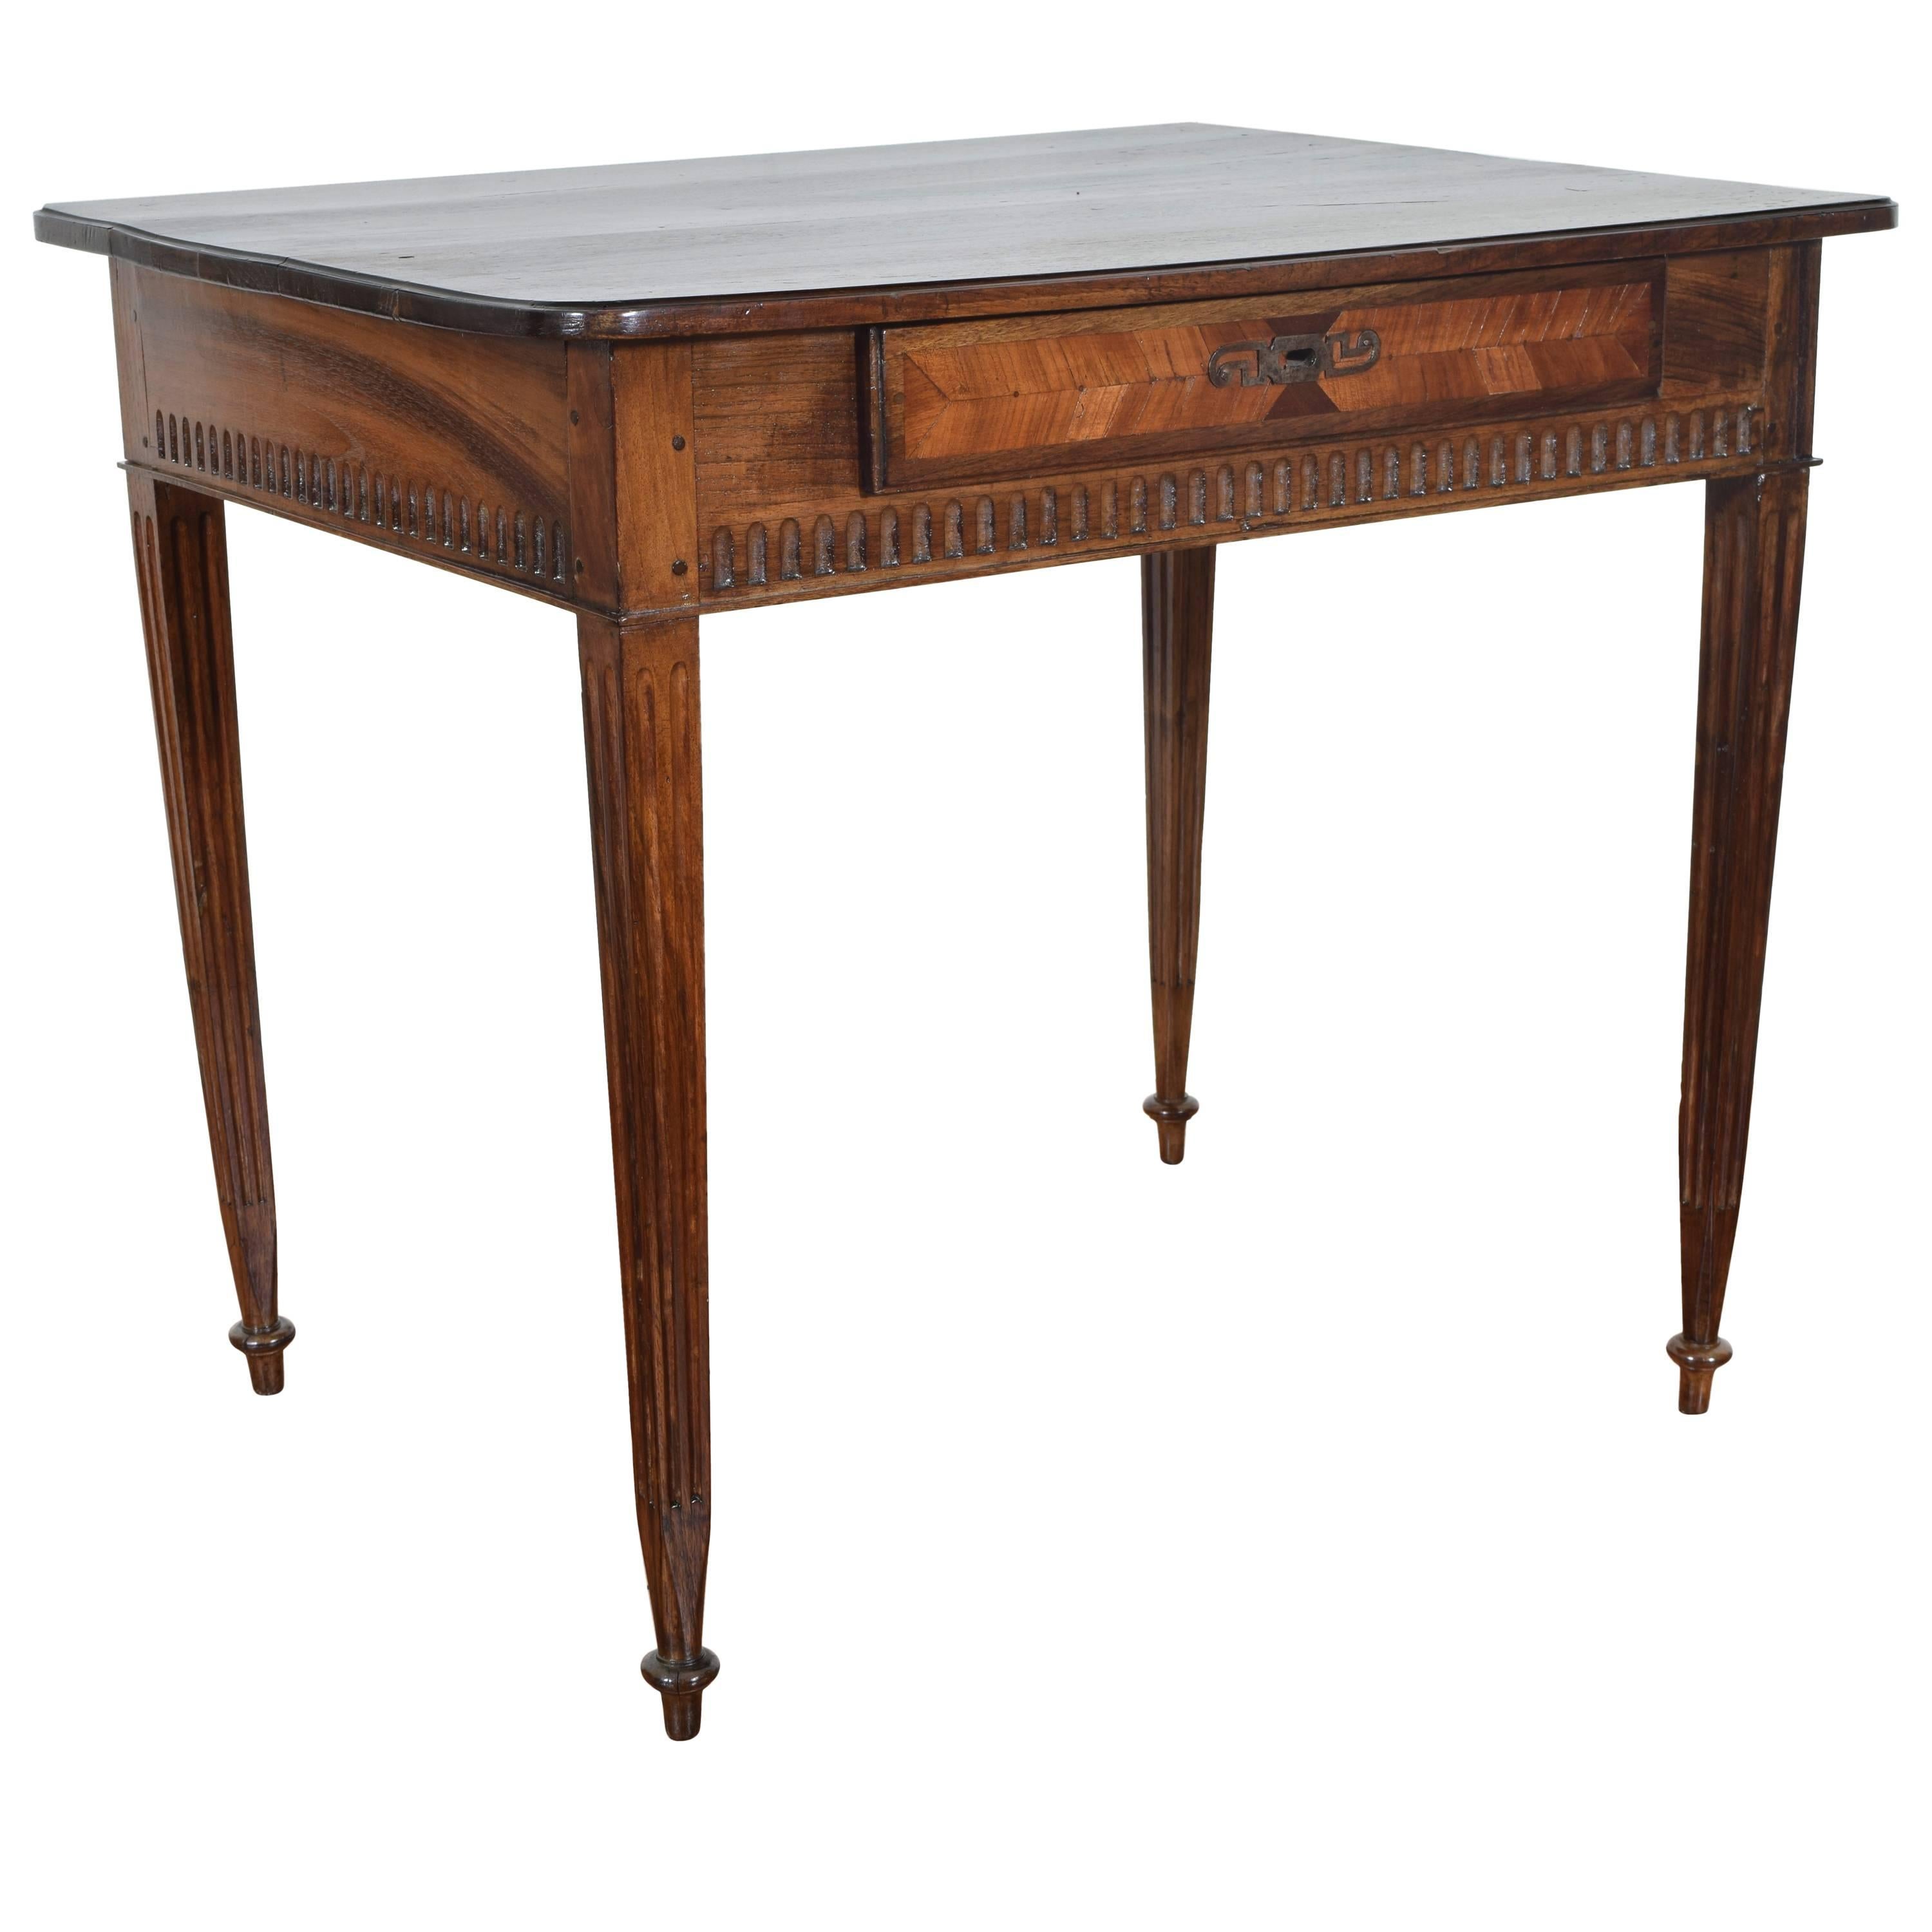 French Neoclassic Carved Walnut and Veneer One-Drawer Table, Early 19th Century